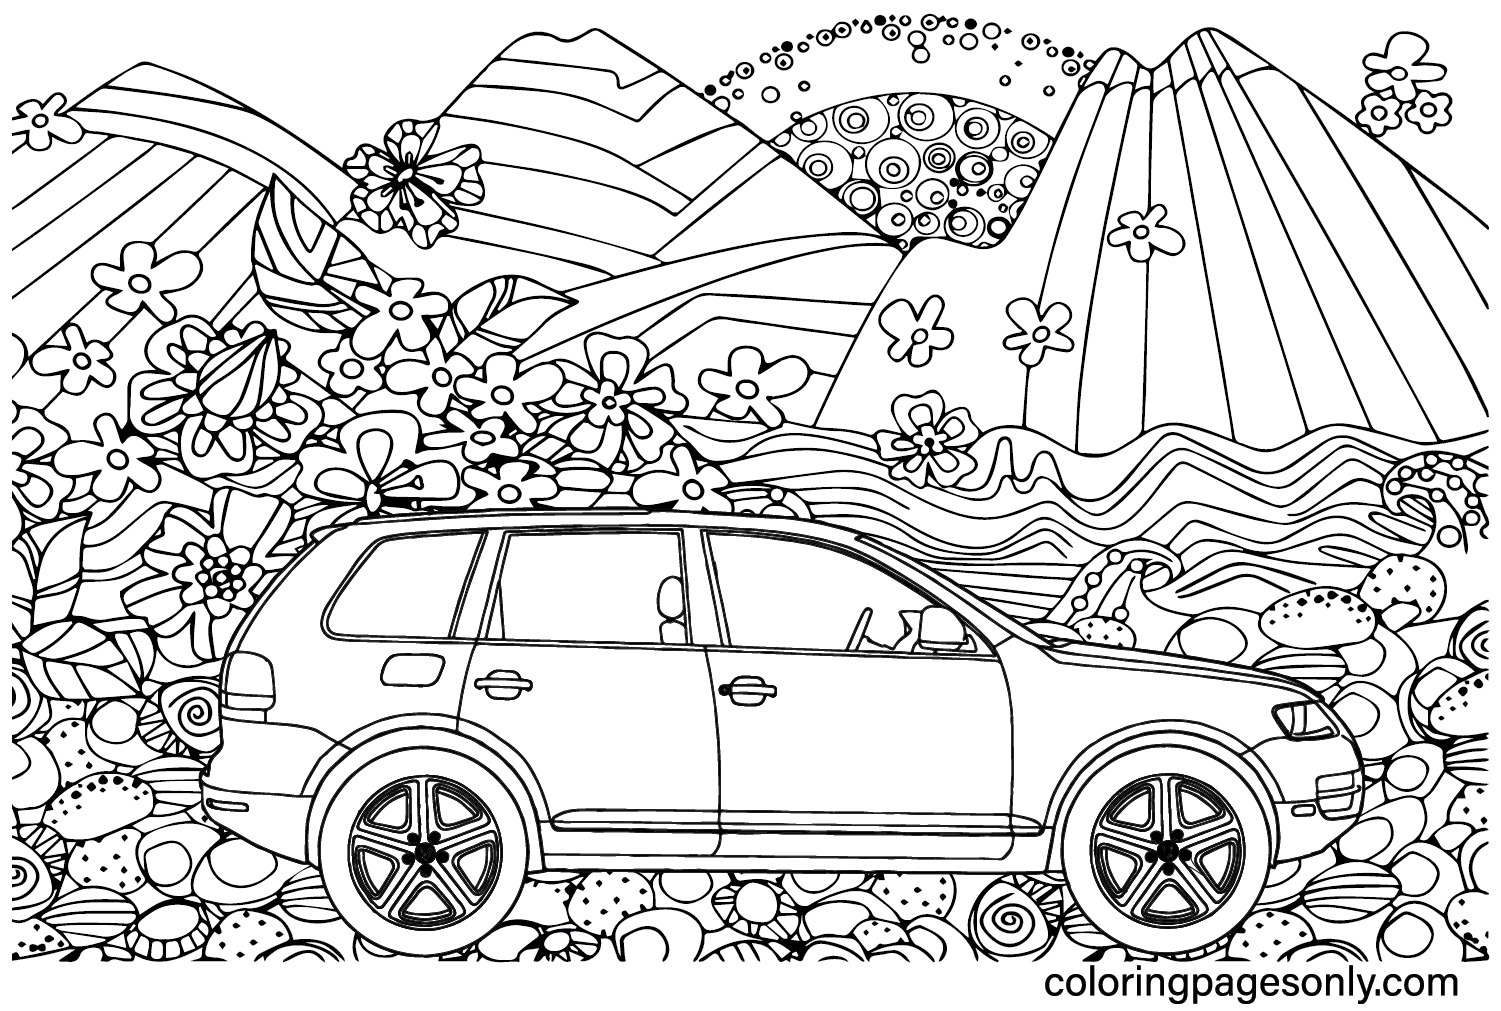 Free Volkswagen Car Coloring Page - Free Printable Coloring Pages